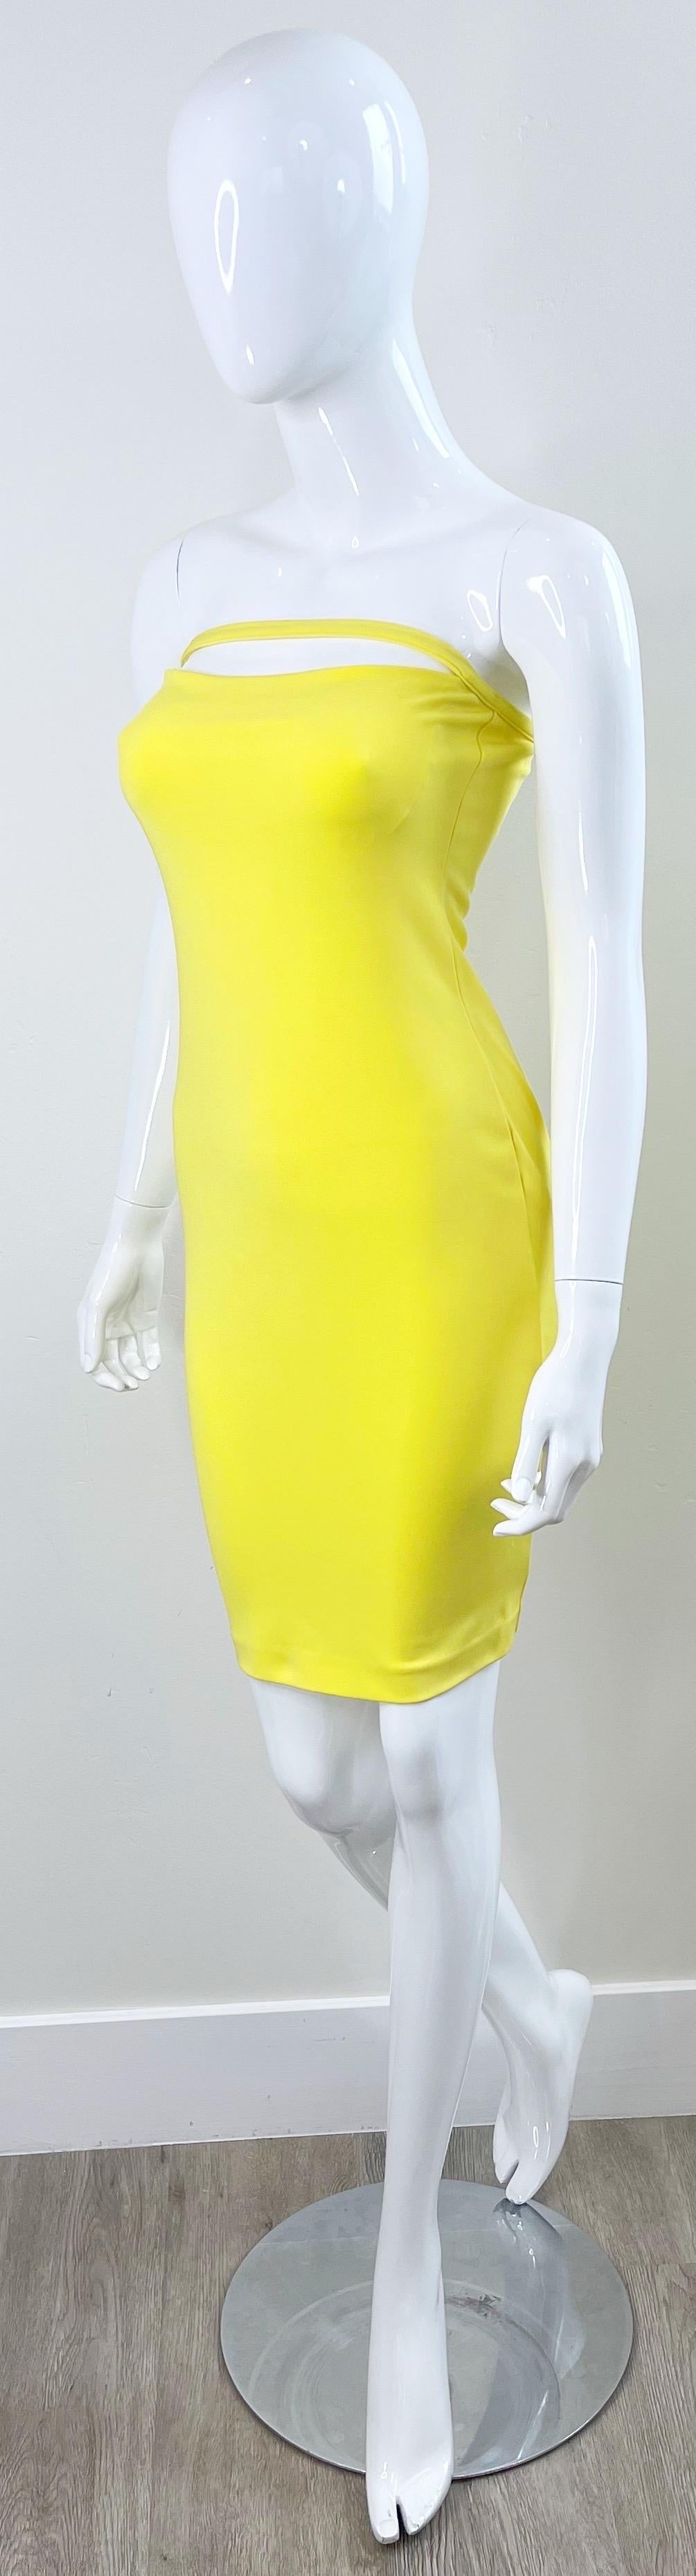 1990s Gianni Versace Versus Size 8 Canary Yellow Strapless Vintage 90s Dress For Sale 6